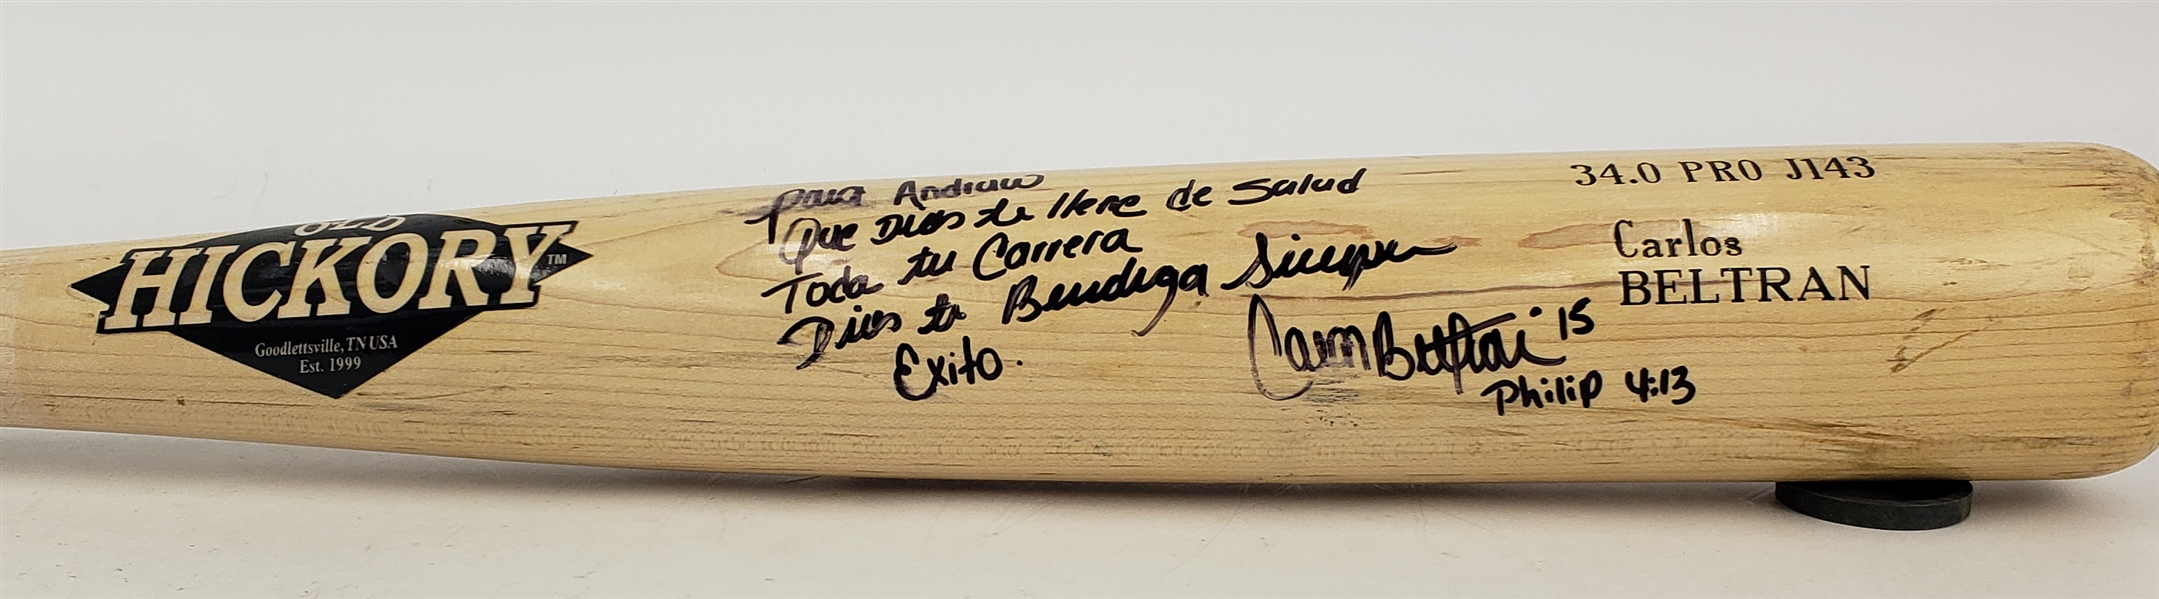 2005-07 Carlos Beltran New York Mets Signed Old Hickory Professional Model Bat (MEARS A7/JSA) Inscribed to Andruw Jones